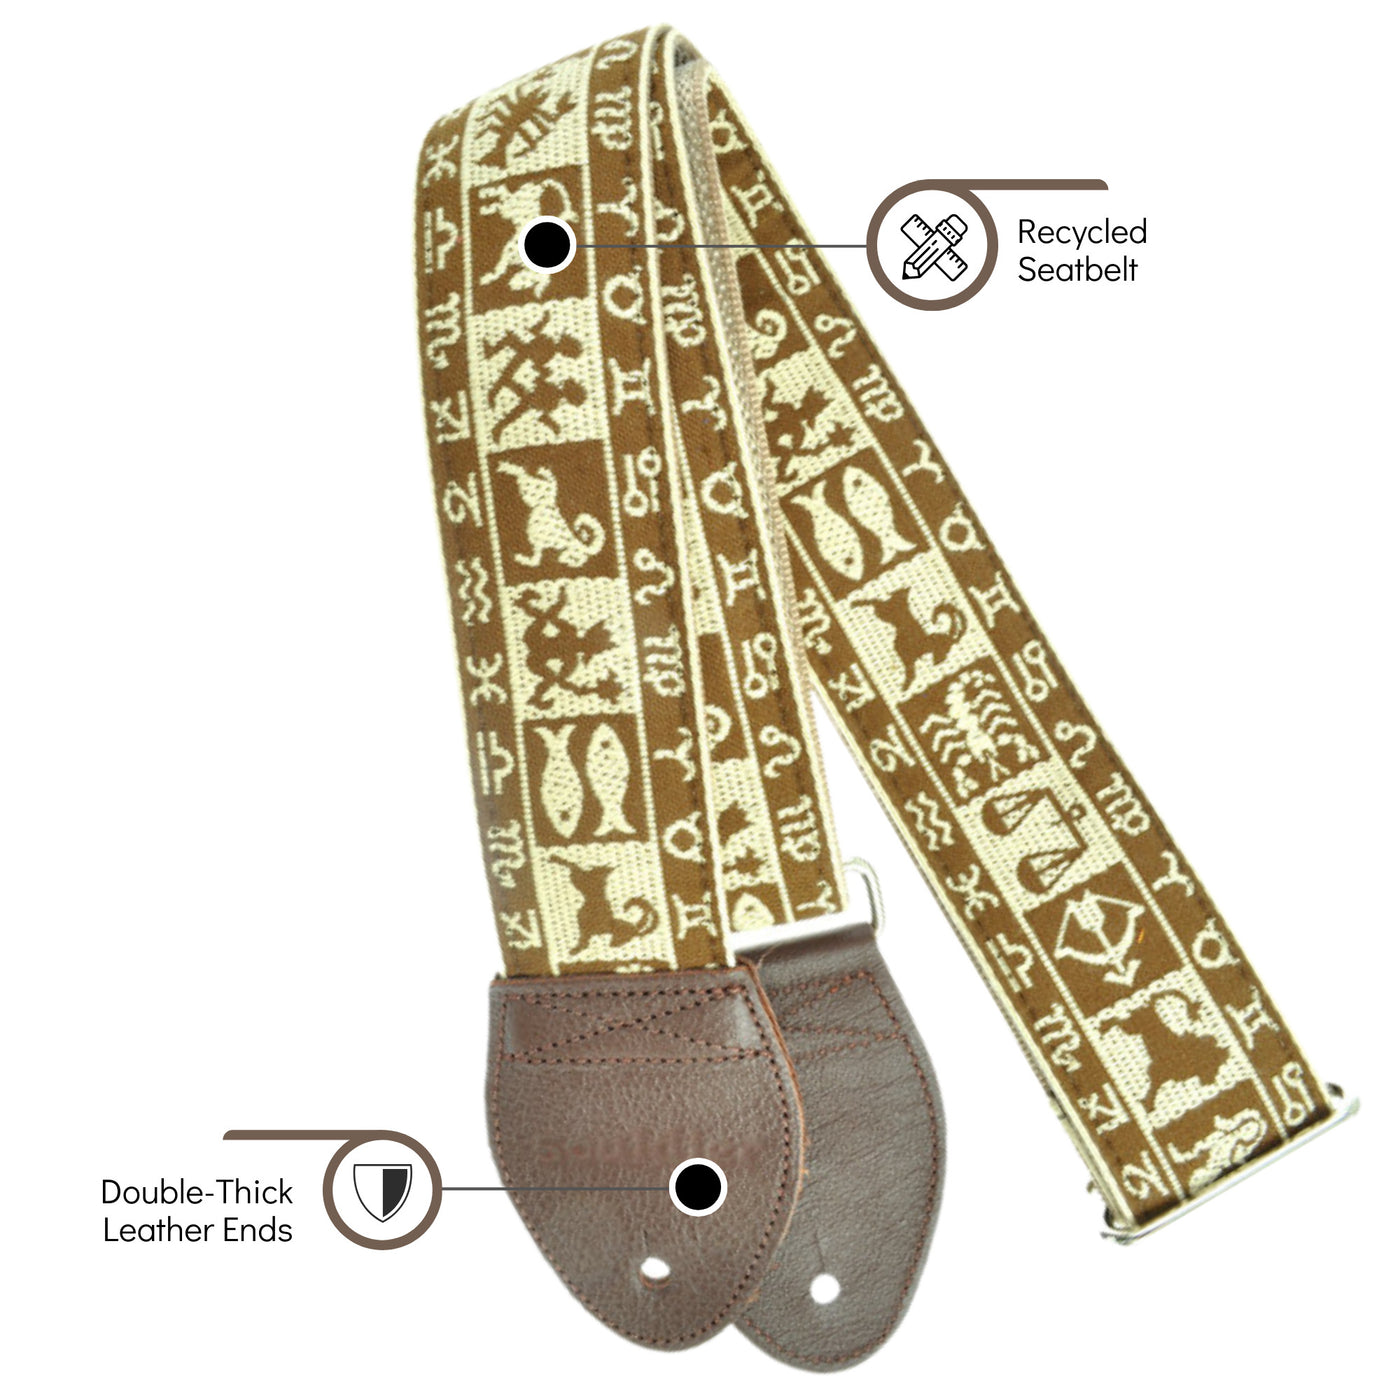 Souldier GS0372TP02WB - Handmade Seatbelt Guitar Strap for Bass, Electric or Acoustic Guitar, 2 Inches Wide and Adjustable Length from 30" to 63"  Made in the USA, Zodiac, Brown and Tan